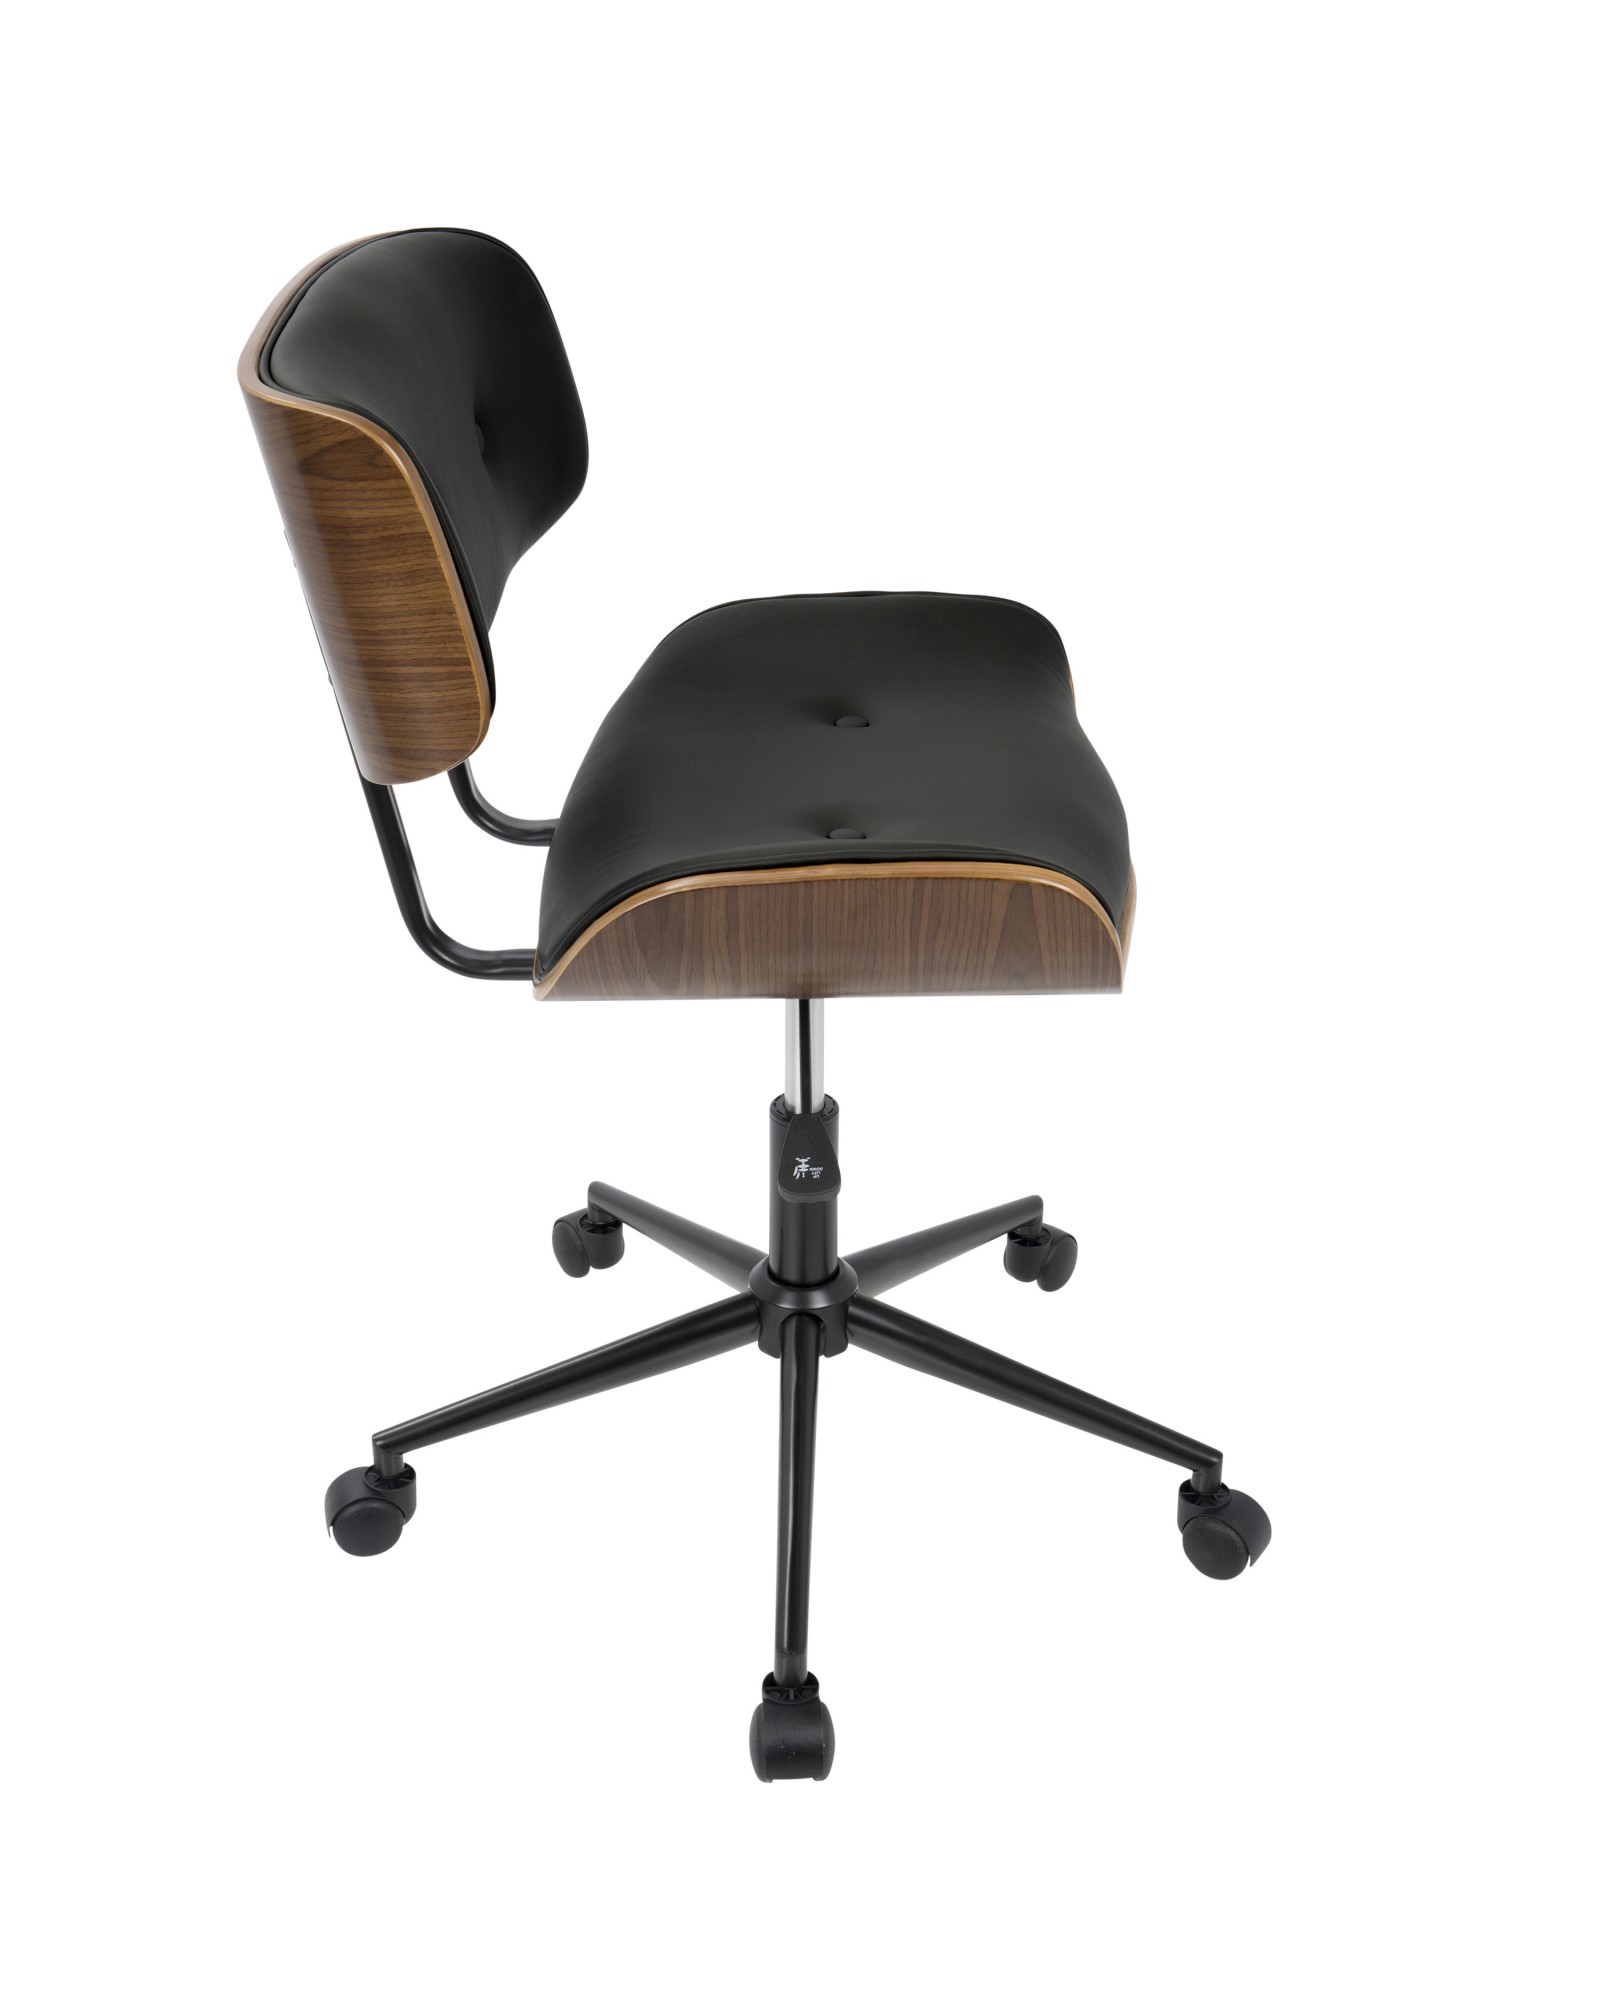 Lombardi Mid-Century Modern Adjustable Office Chair with Swivel in Walnut and Black